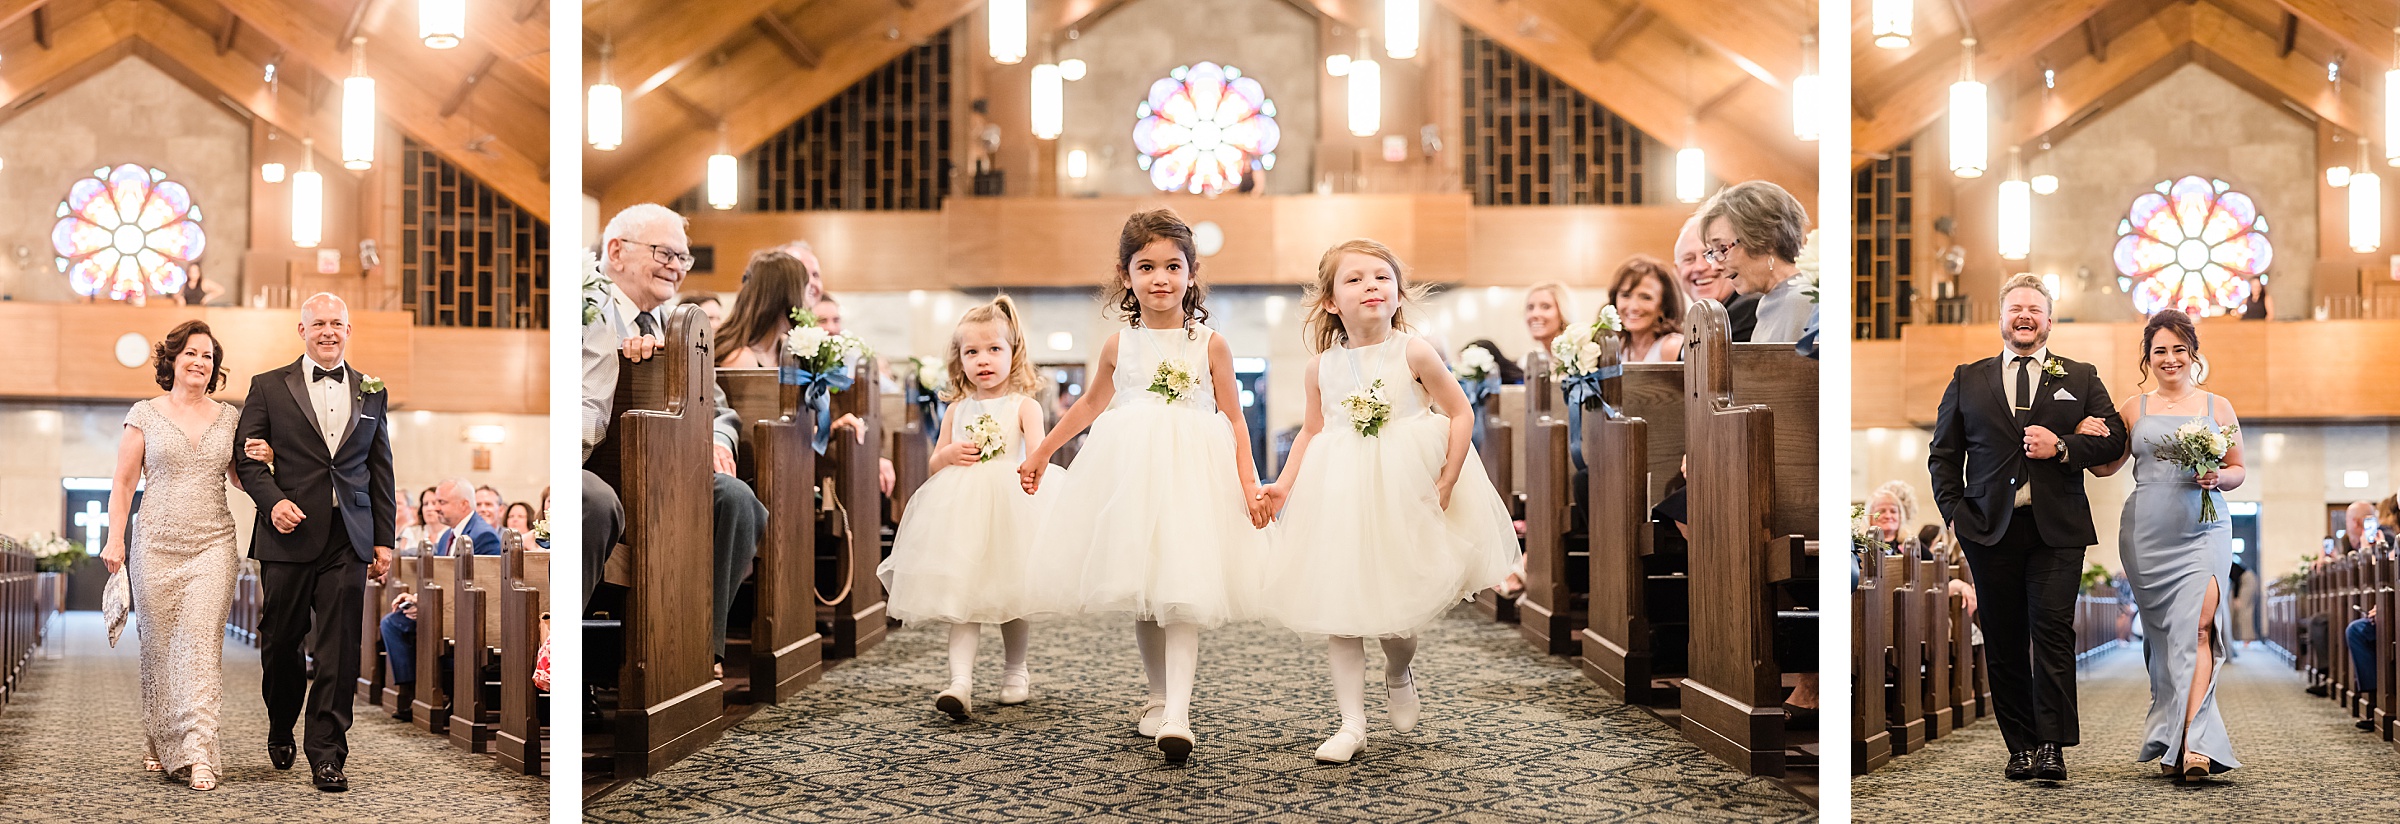 Flowergirls walk down the aisle during a wedding at Our Lady of the Wayside Church in Illinois.